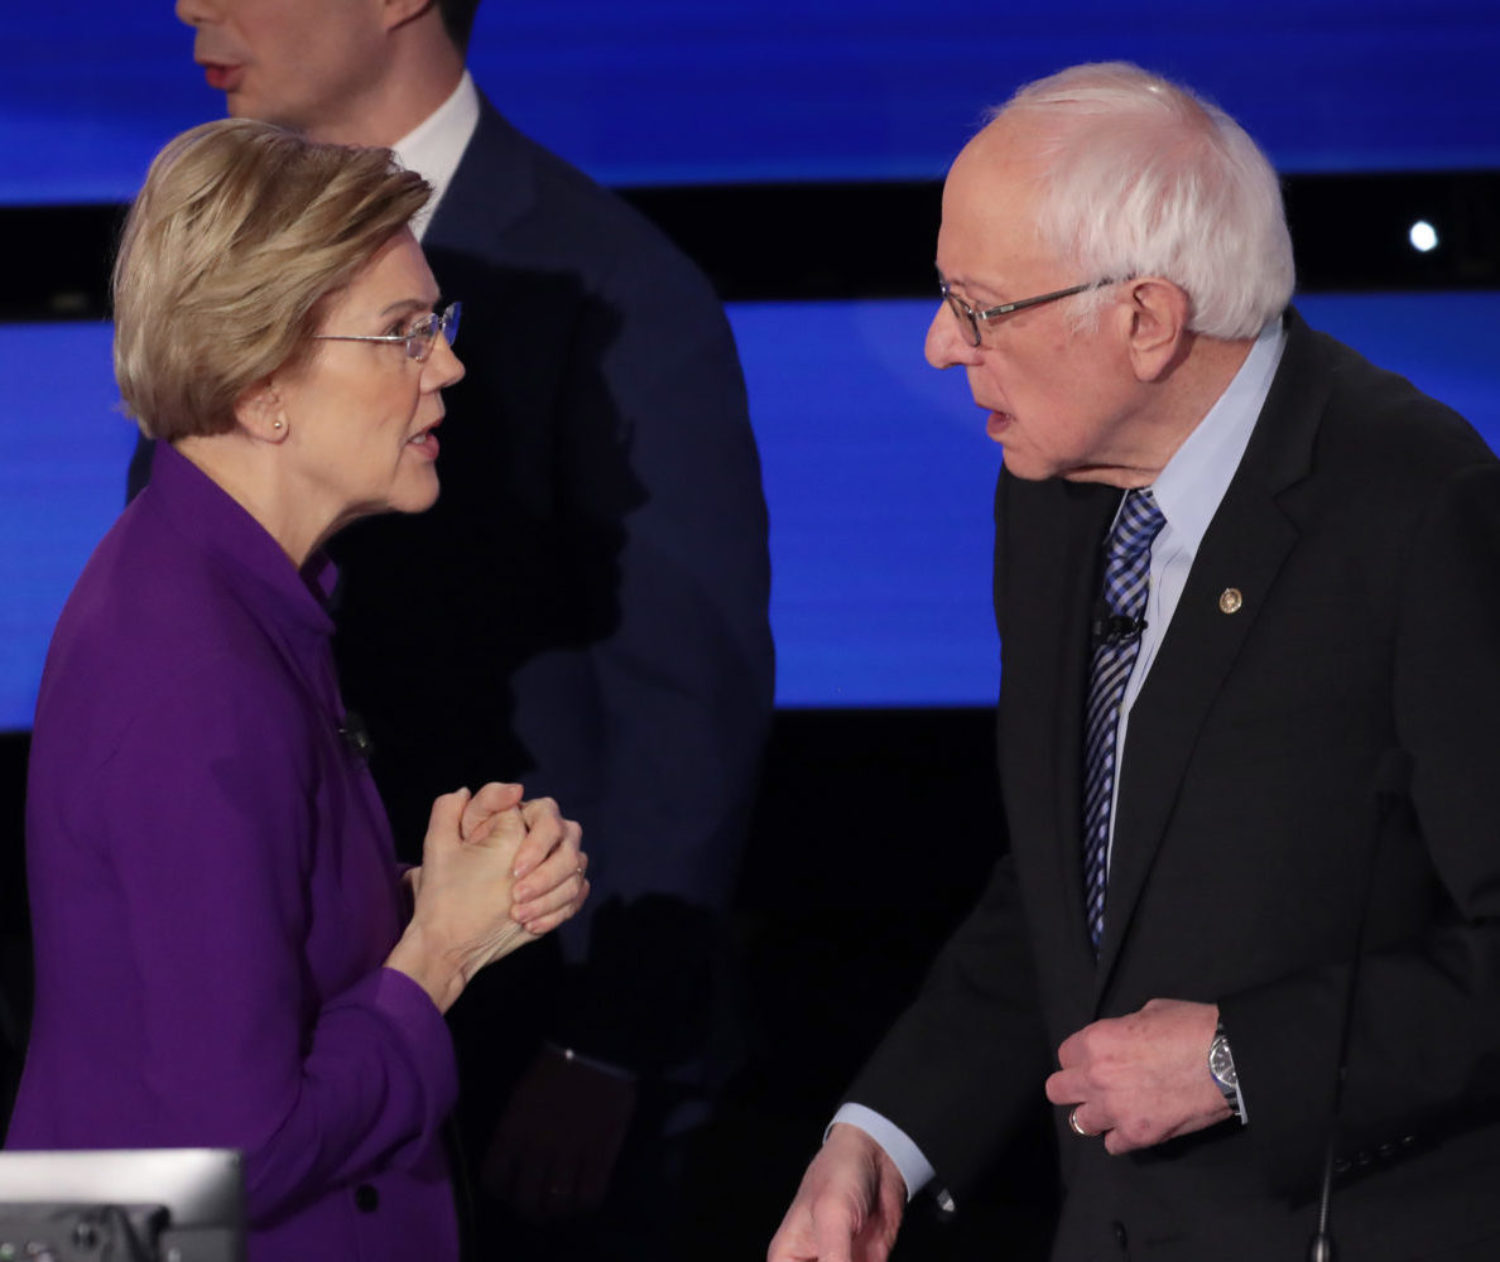 DES MOINES, IOWA - JANUARY 14: Sen. Elizabeth Warren (D-MA) and Sen. Bernie Sanders (I-VT) speak after the Democratic presidential primary debate at Drake University on January 14, 2020 in Des Moines, Iowa. Six candidates out of the field qualified for the first Democratic presidential primary debate of 2020, hosted by CNN and the Des Moines Register. (Photo by Scott Olson/Getty Images)